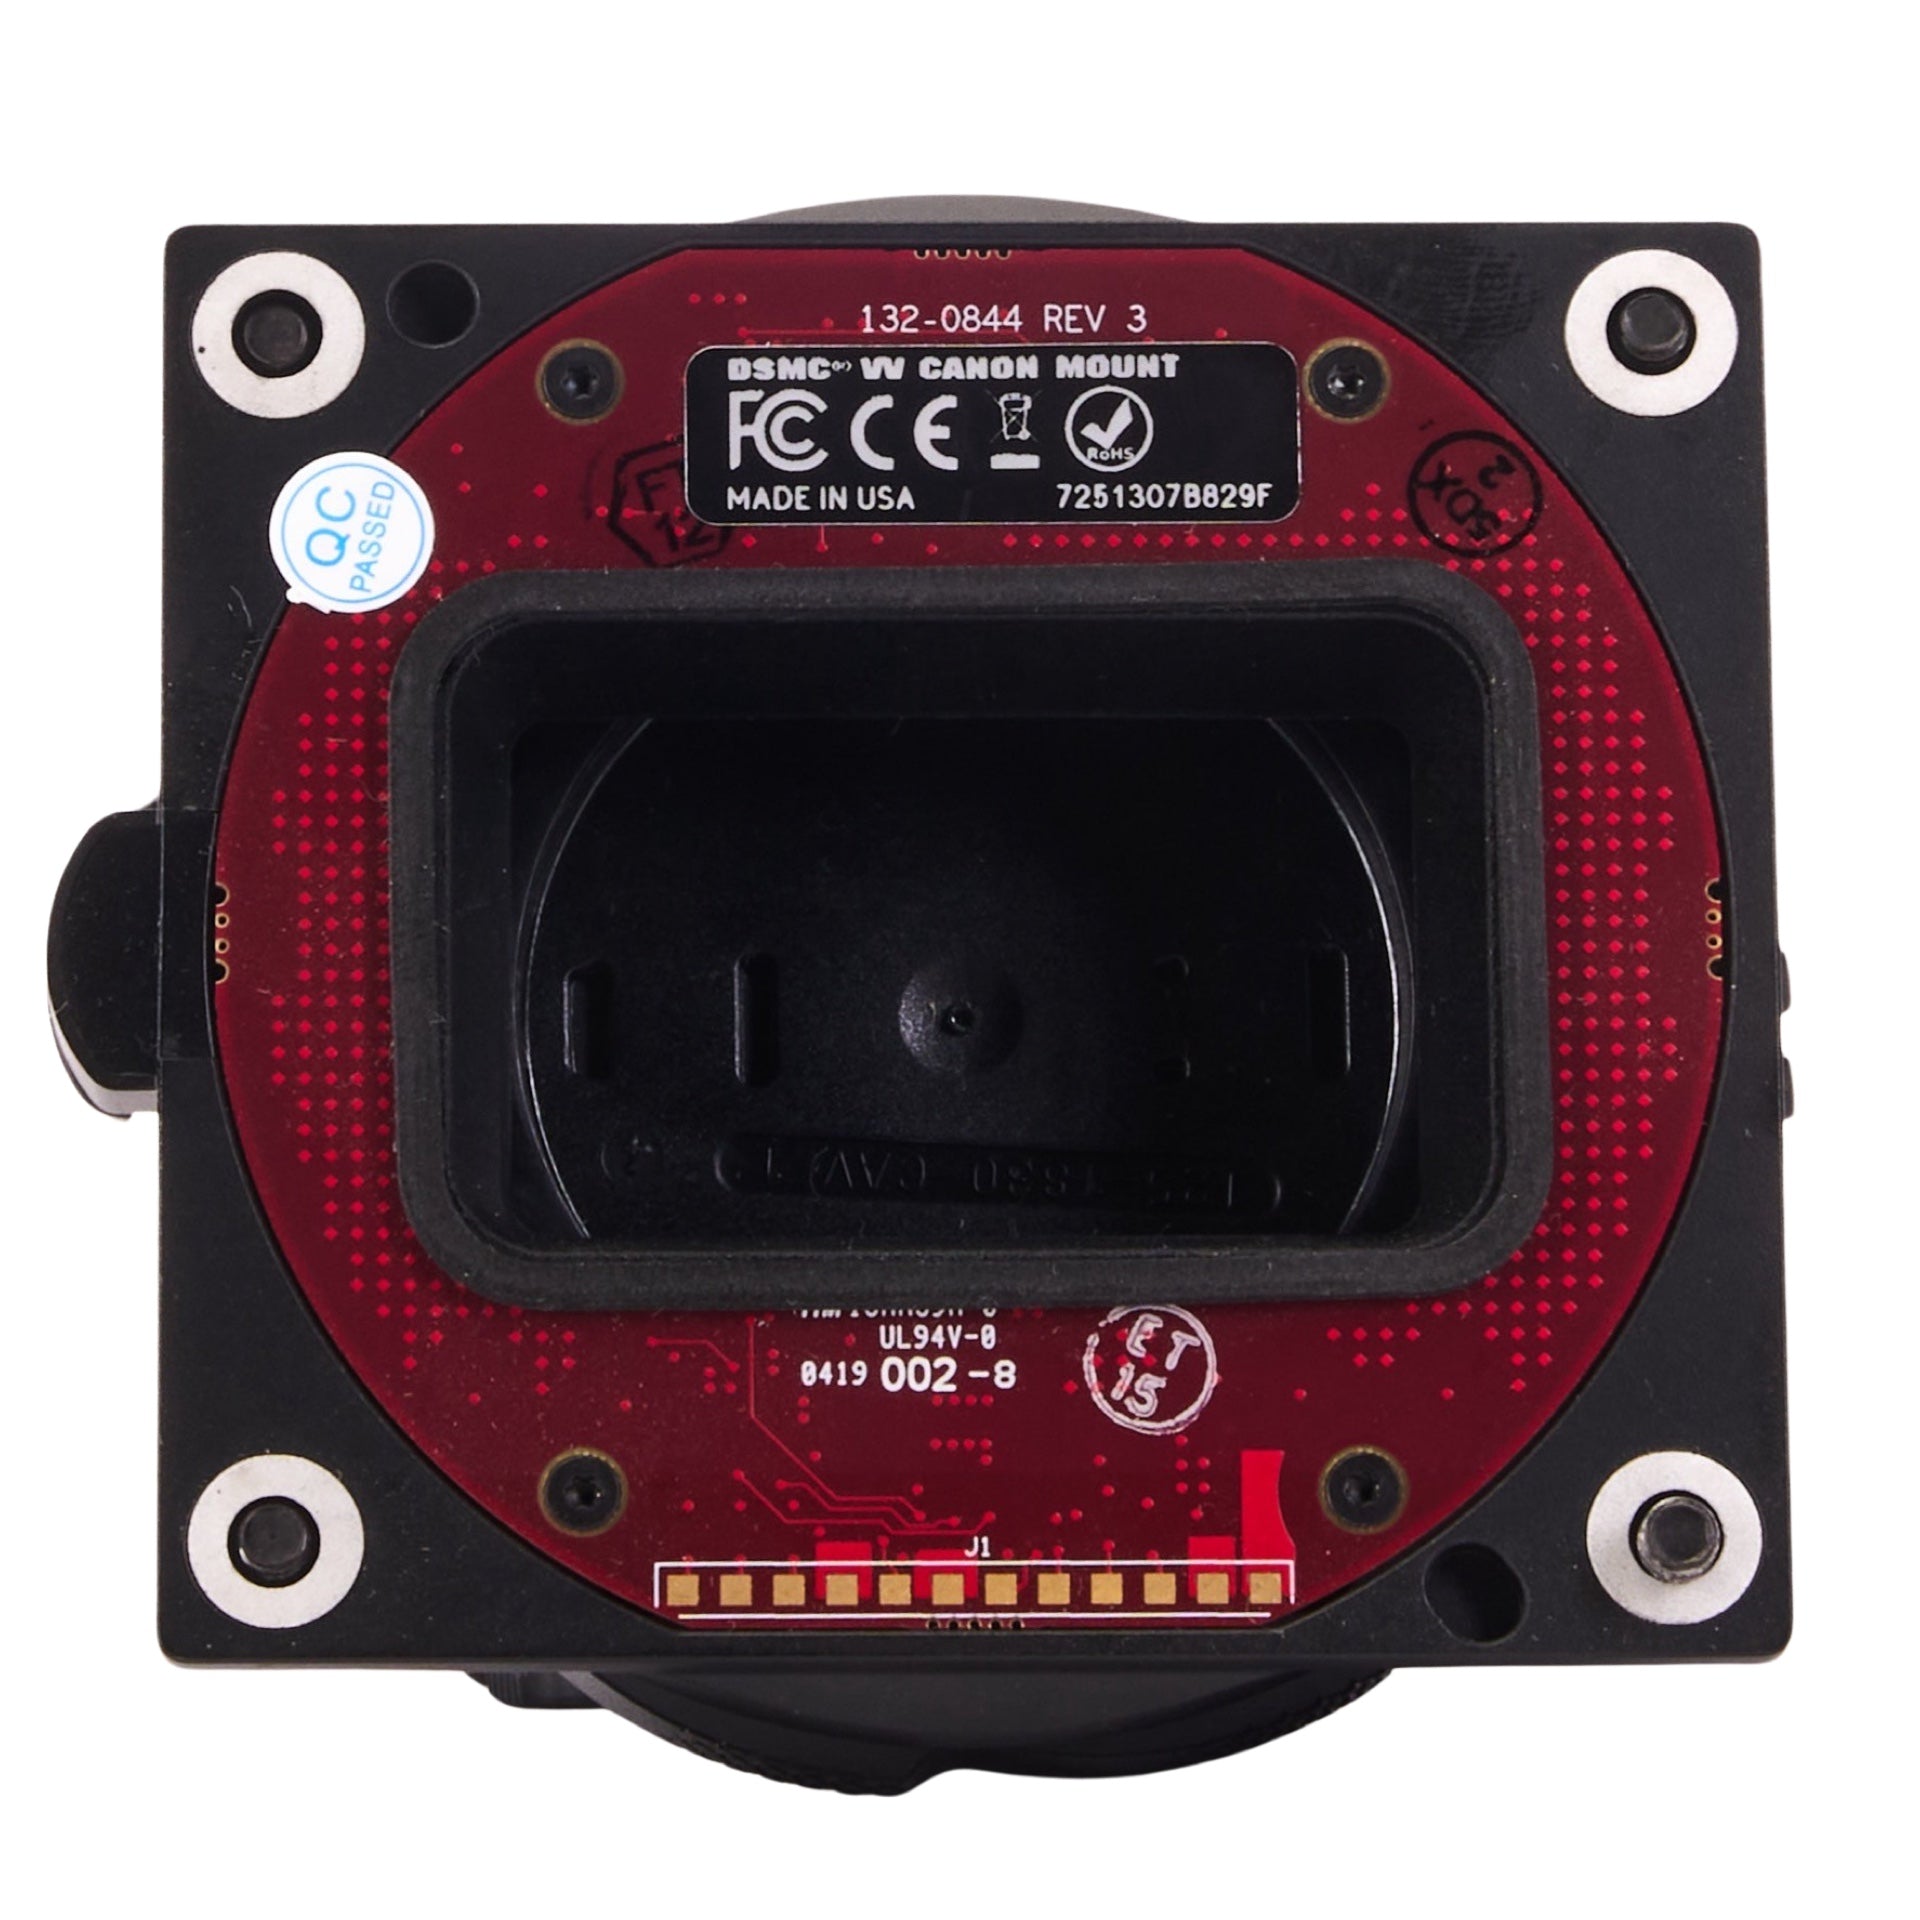 ACC3491 RED Aluminum EF Canon VV Mount with Captive Screws_000170.JPG